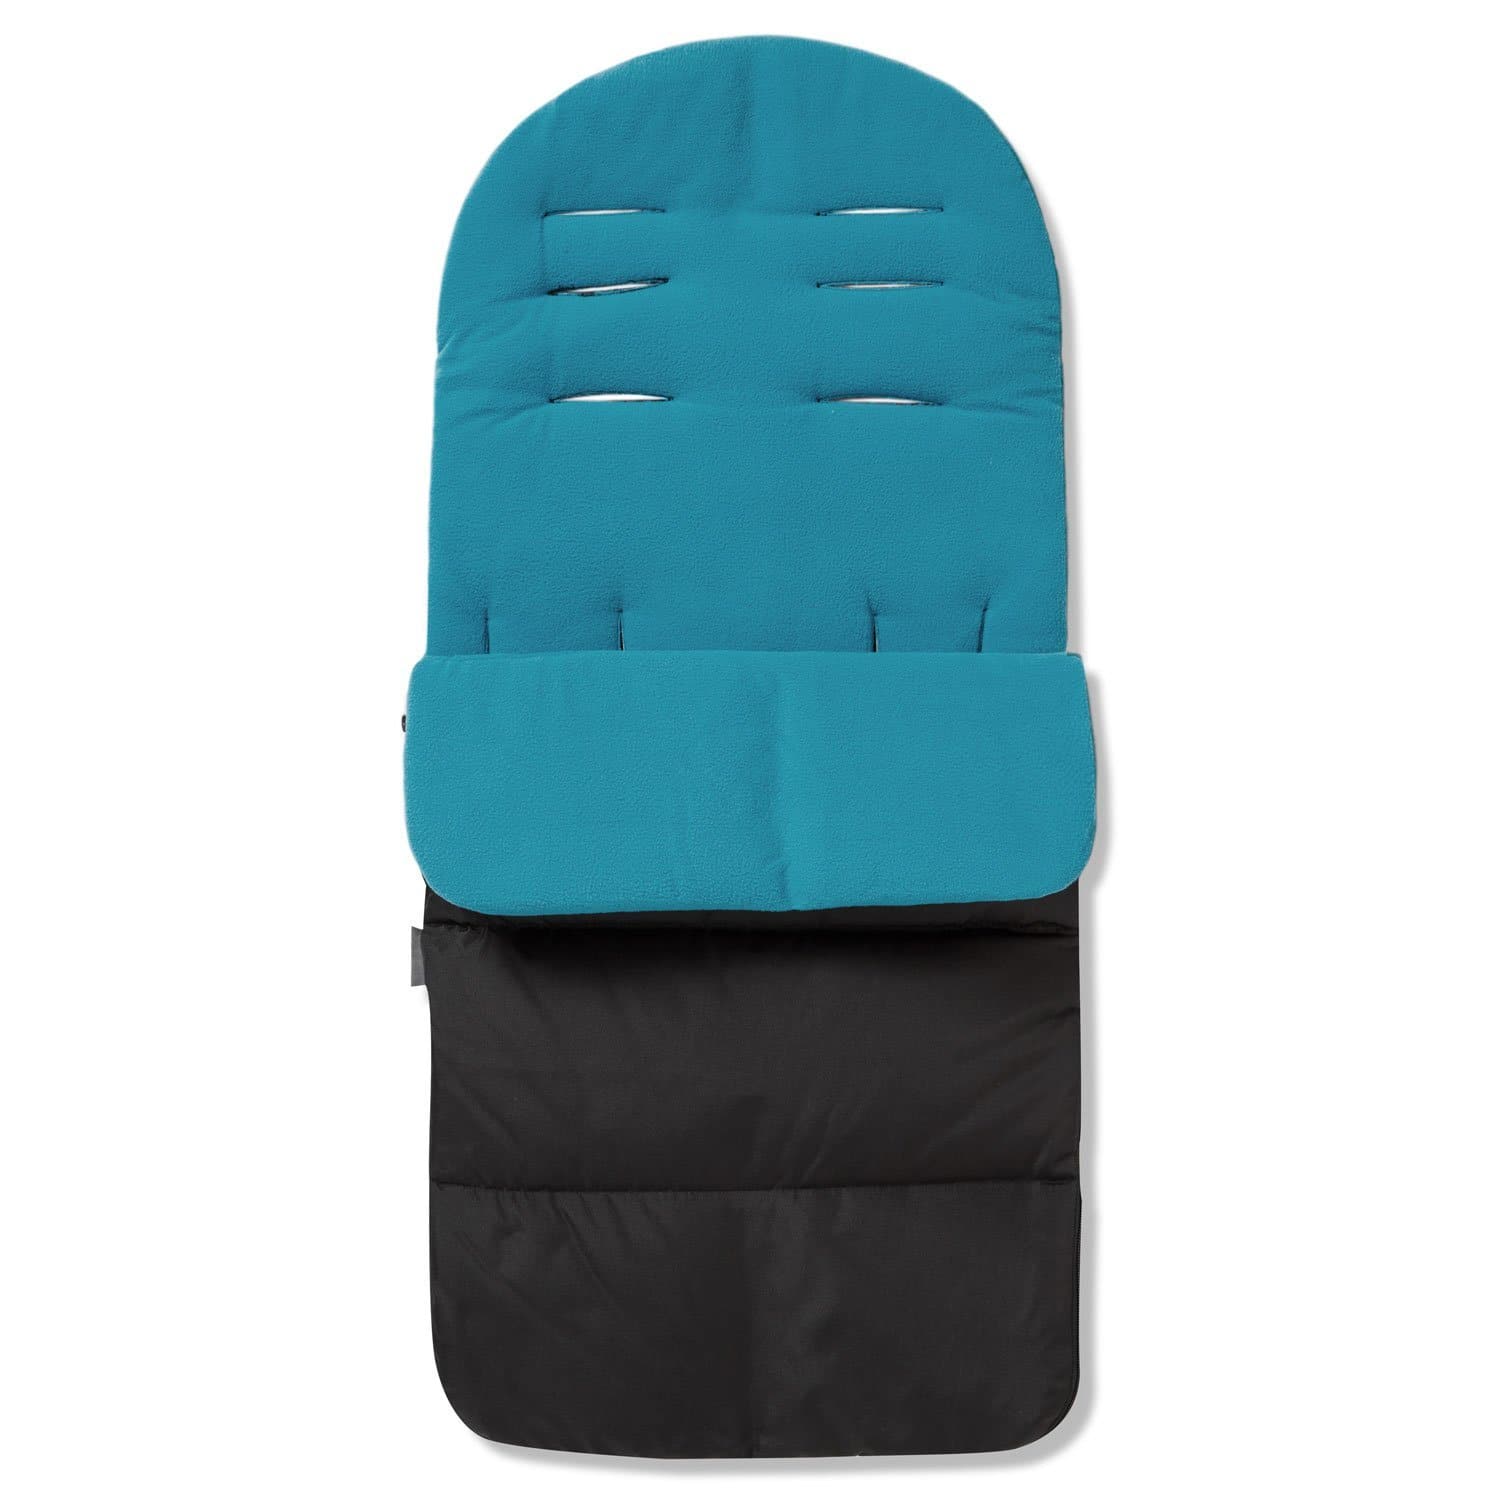 Premium Footmuff / Cosy Toes Compatible with Kiddicouture - Ocean Blue / Fits All Models | For Your Little One